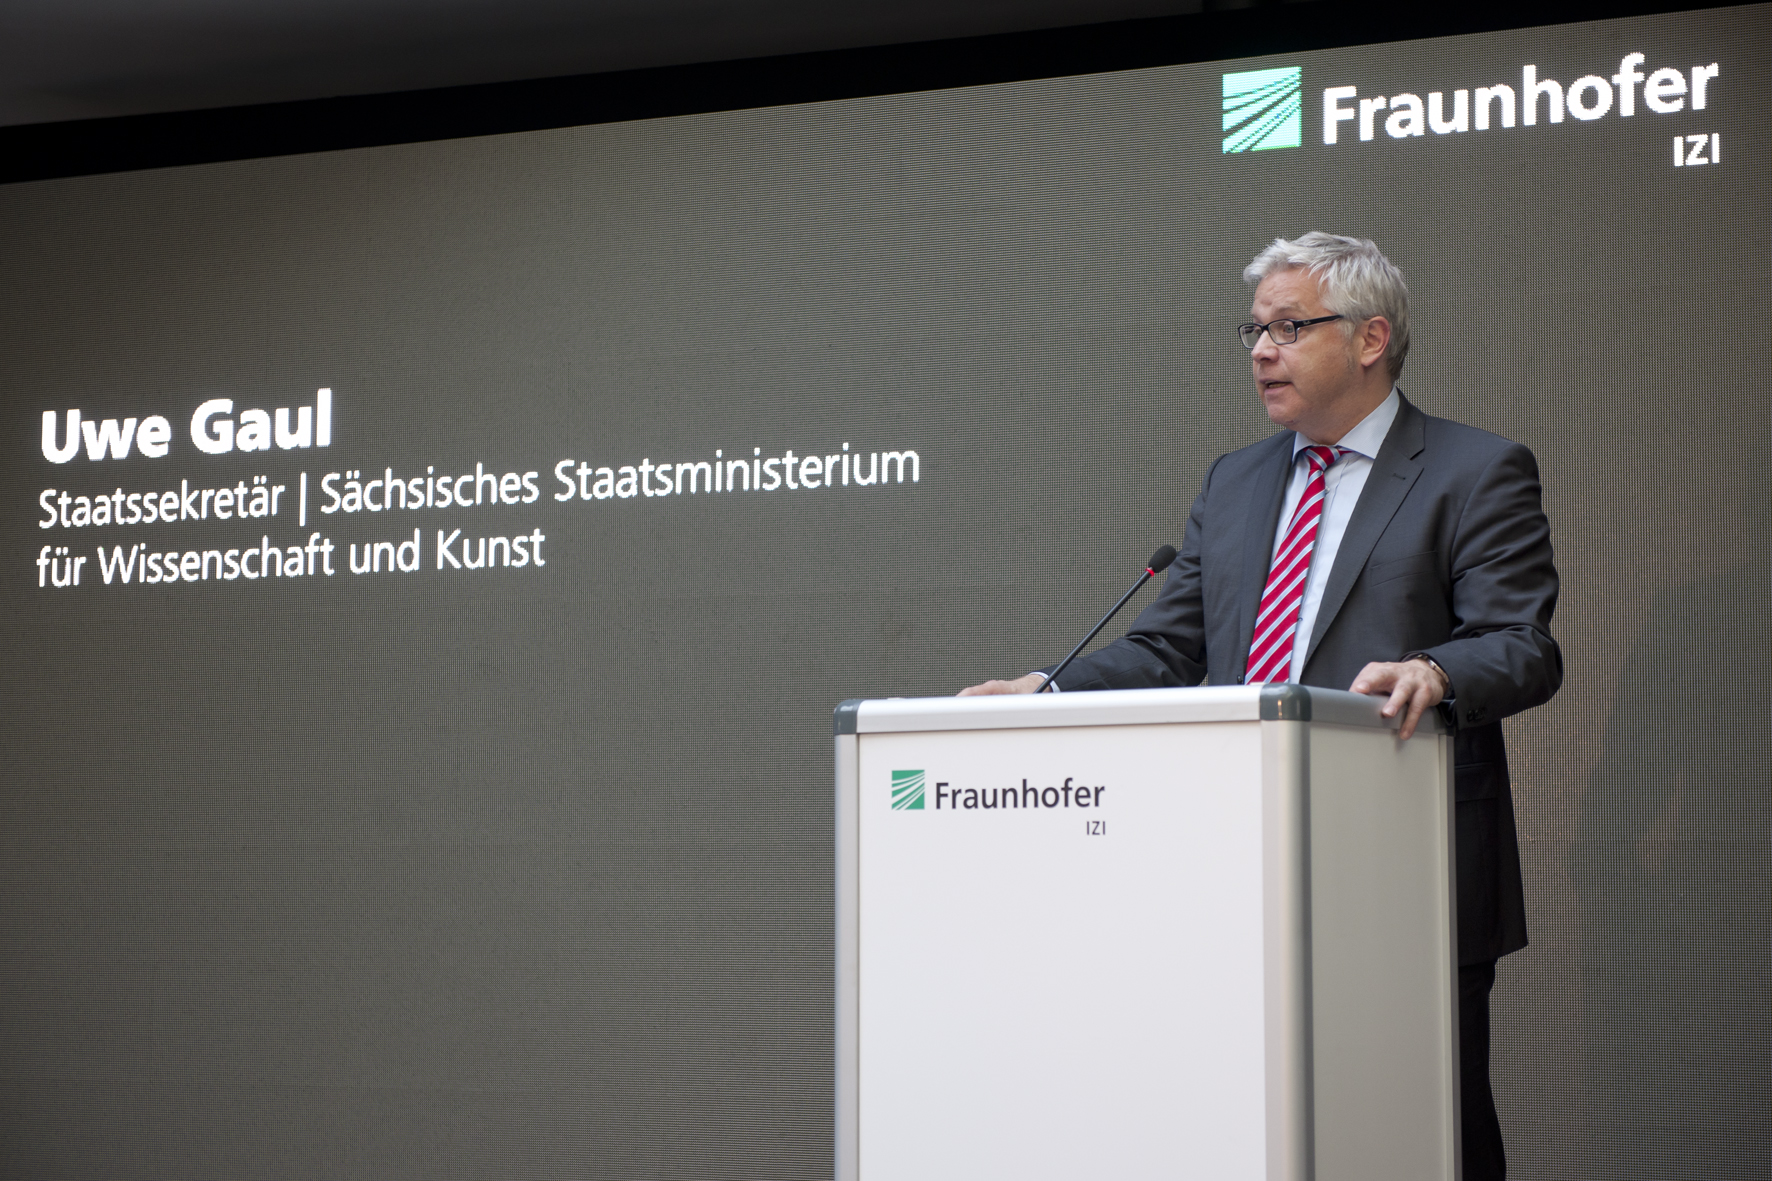 State Secretary Uwe Gaul delivering his welcome speech to mark ten years of the Fraunhofer IZI.